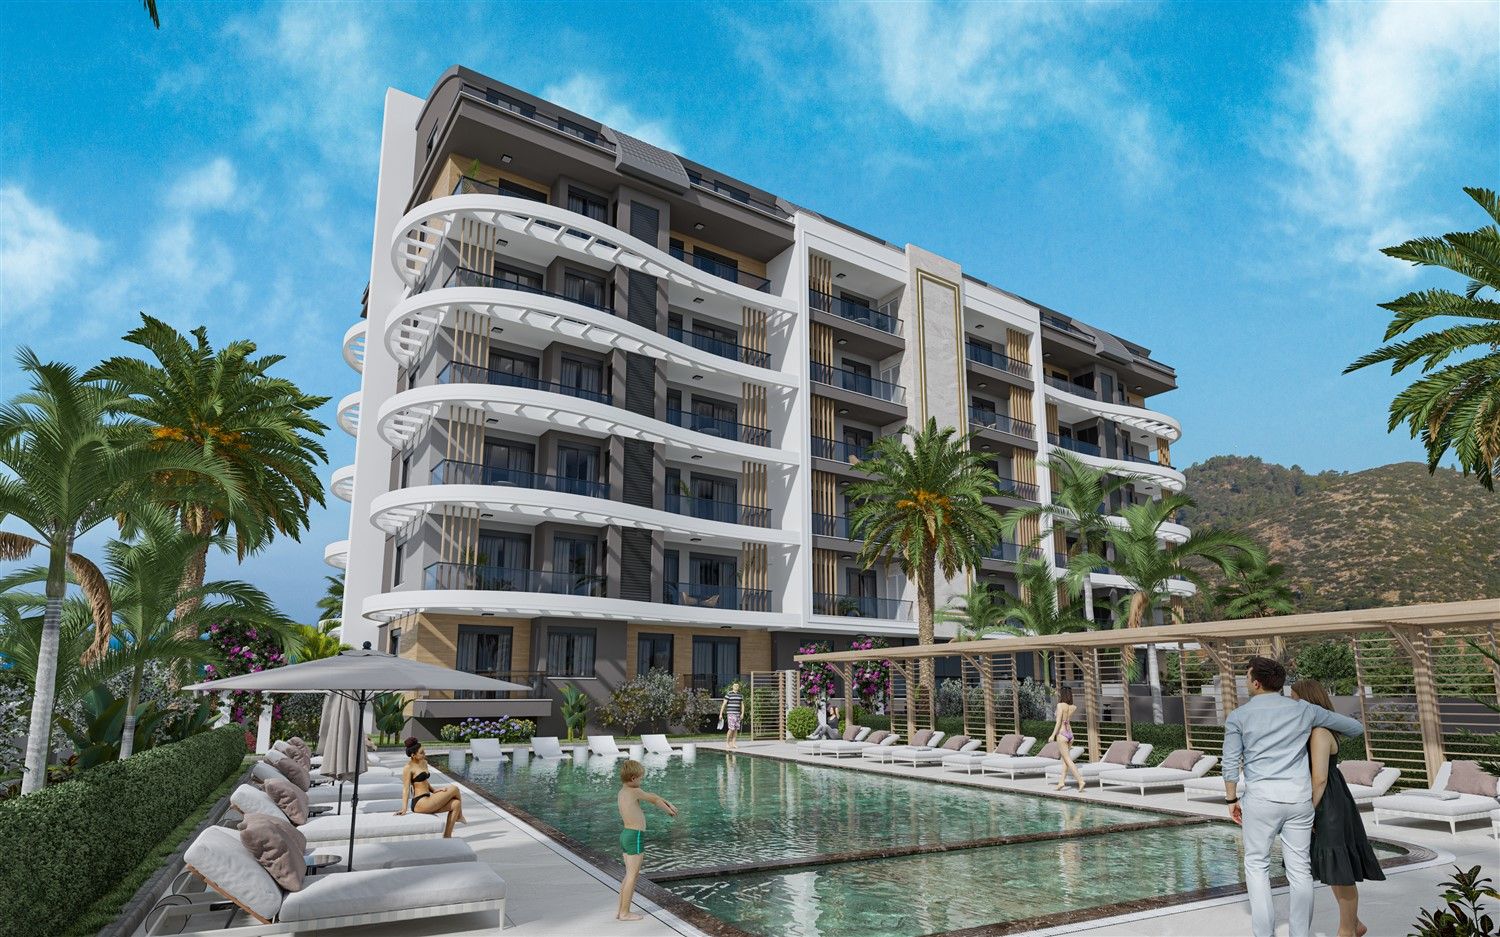 Project of residential complex within walking distance from the sea, Gazipasa